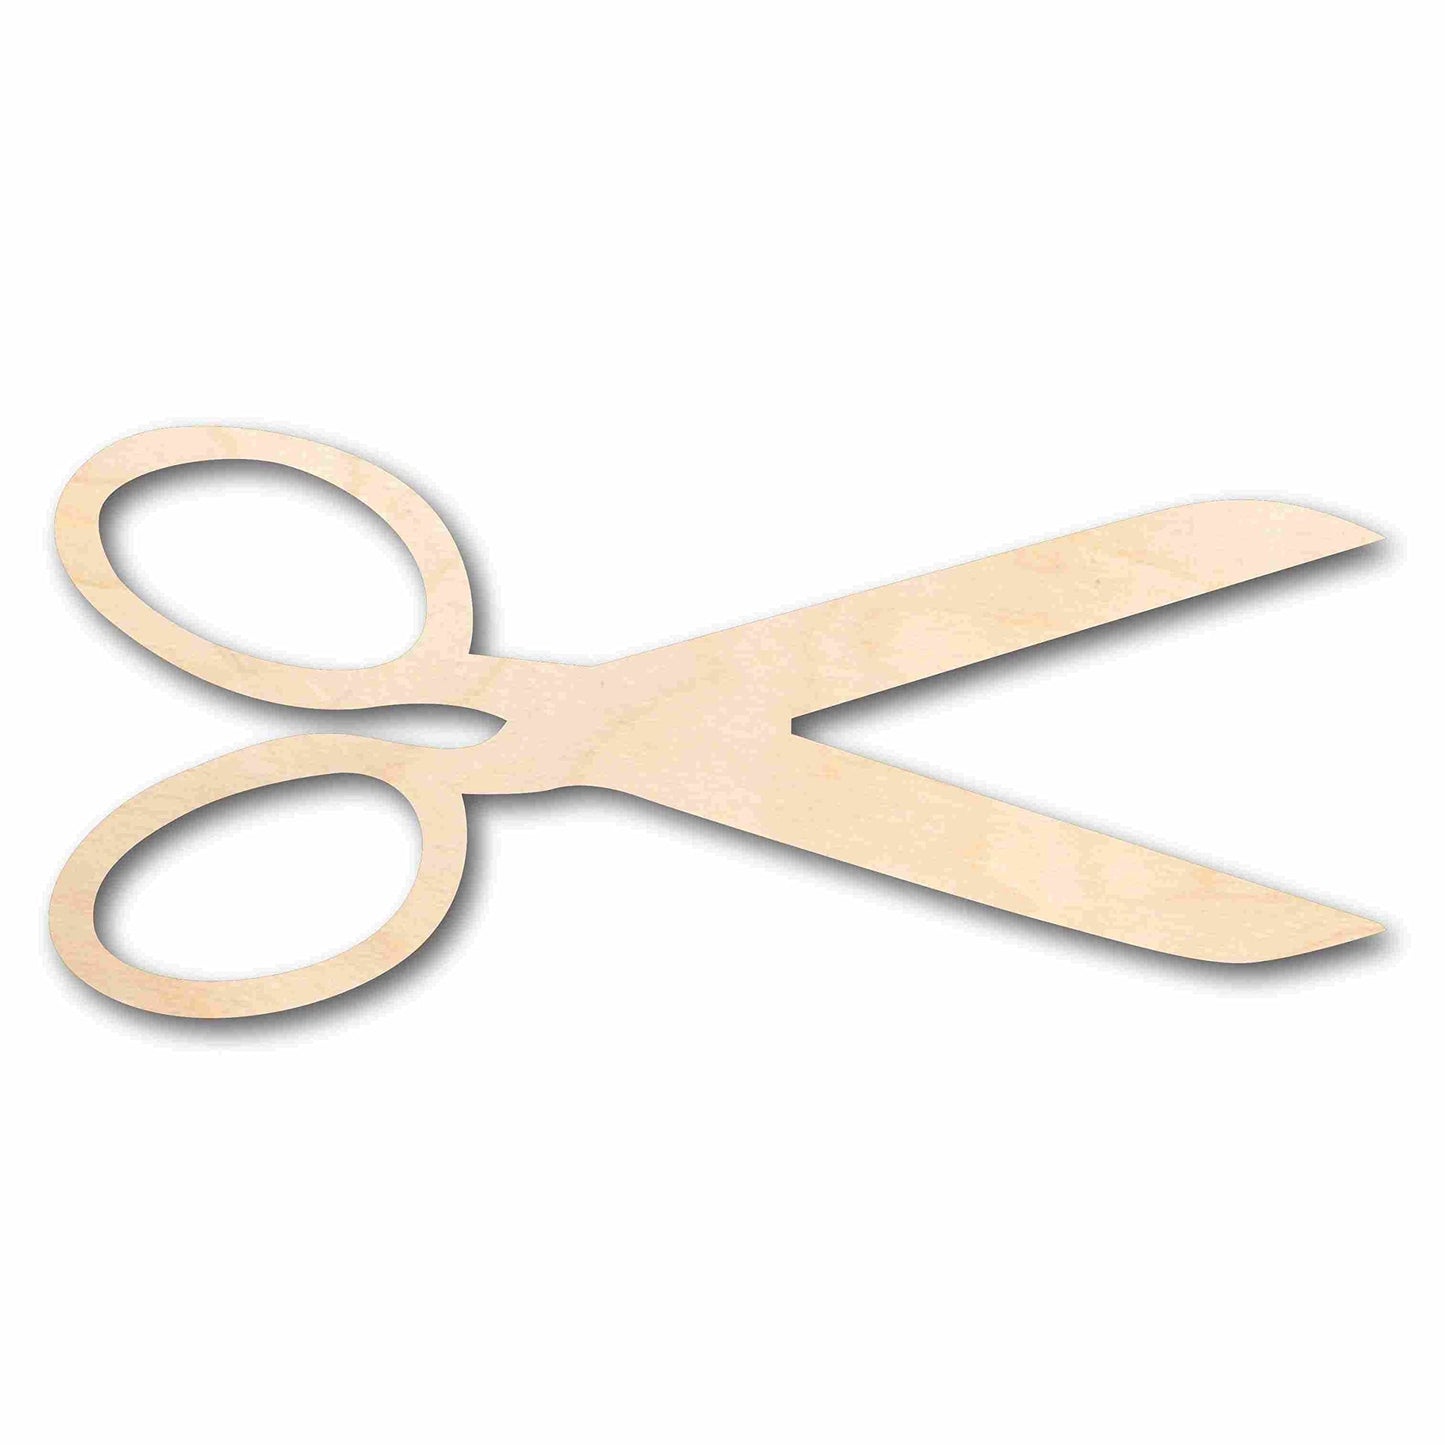 Unfinished Wood Scissors Silhouette - Craft- up to 24" DIY 20" / 1/8"